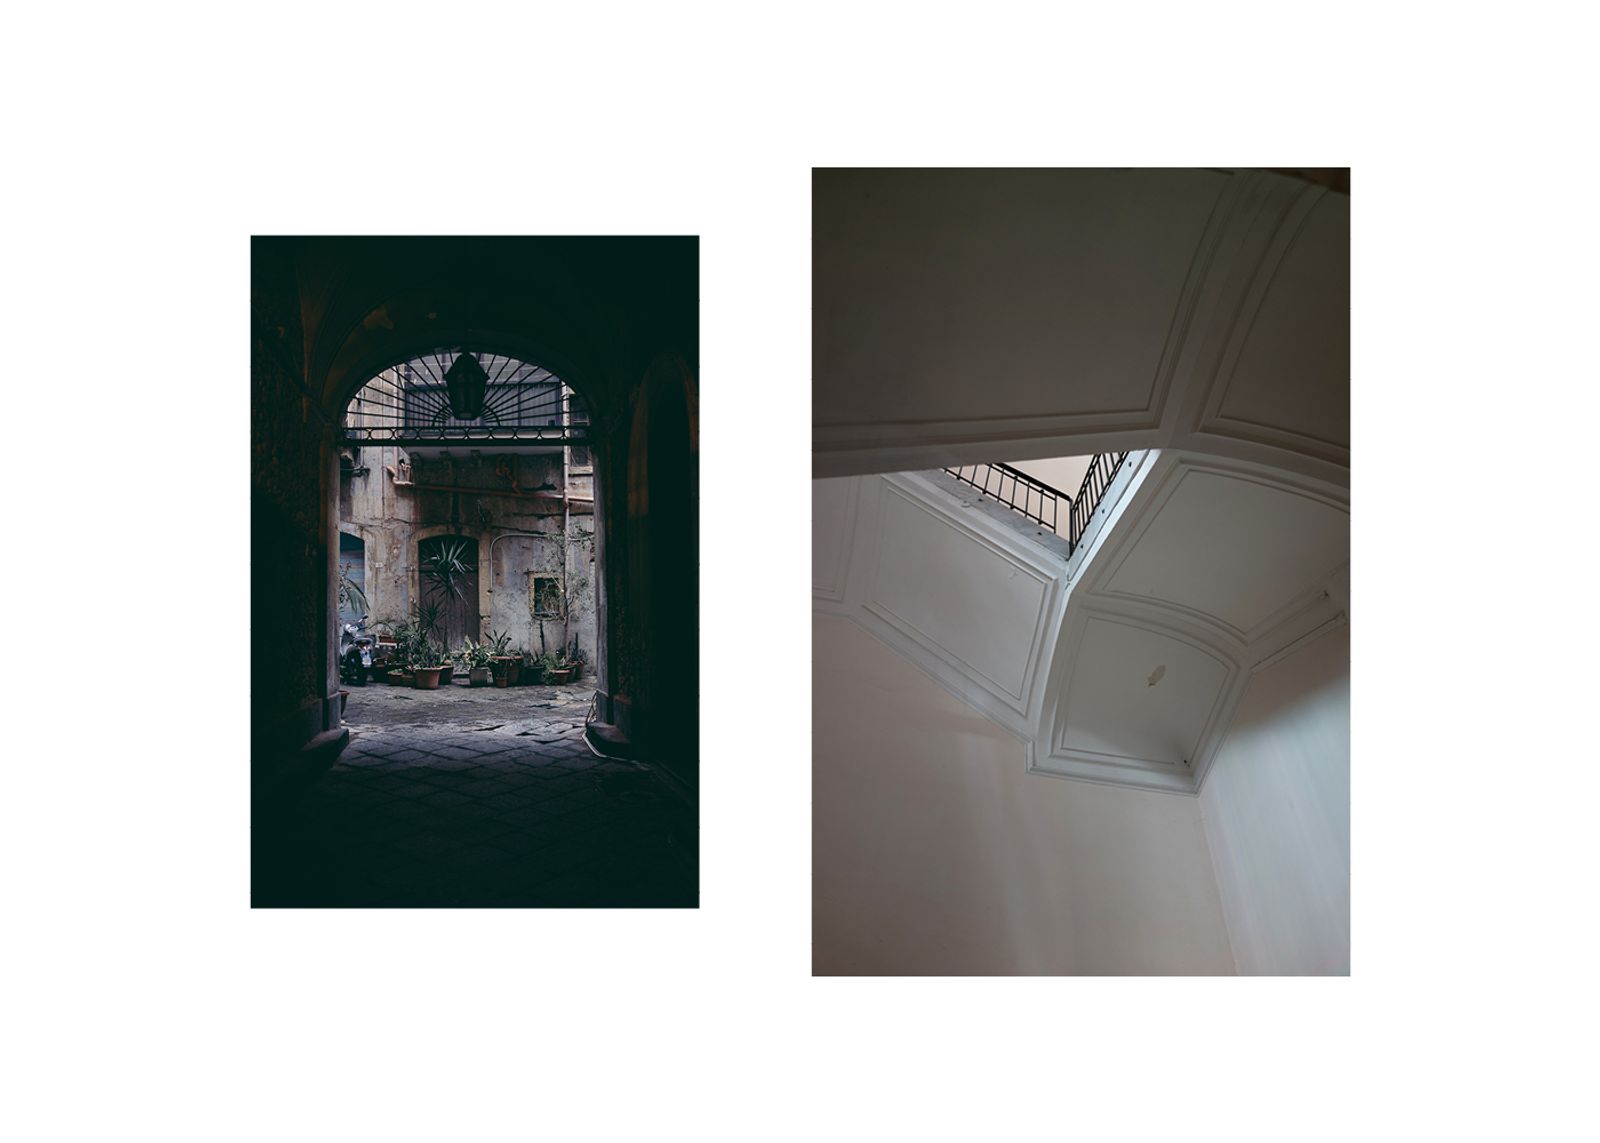 © Francesca Todde - The courtyard and stairs of Goliarda’s family home, Catania